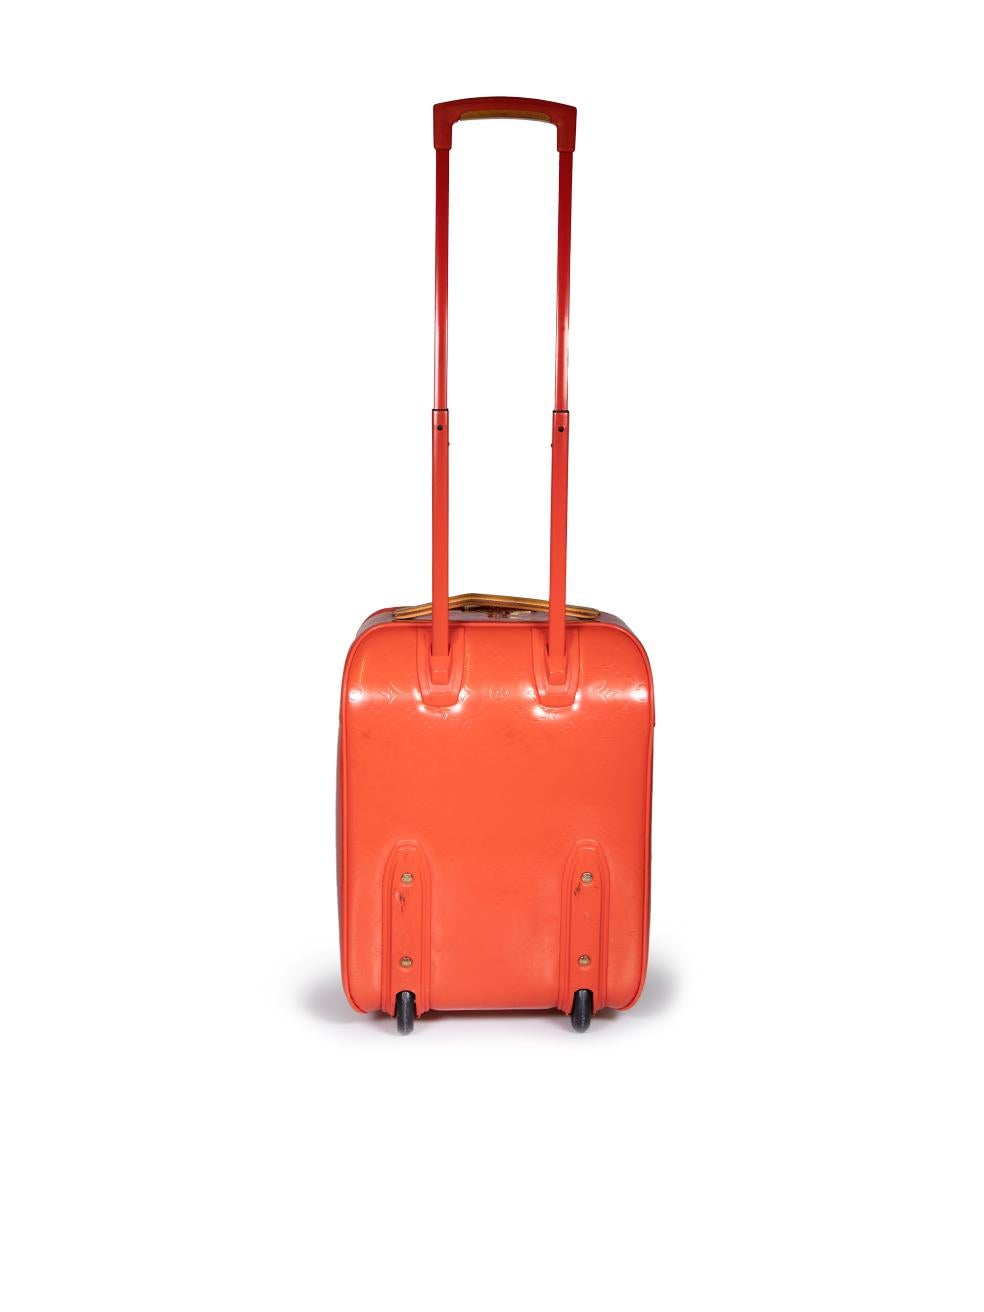 Louis Vuitton 2009 Red Vernis Leather Monogram Pegase 45 Suitcase In Good Condition For Sale In London, GB